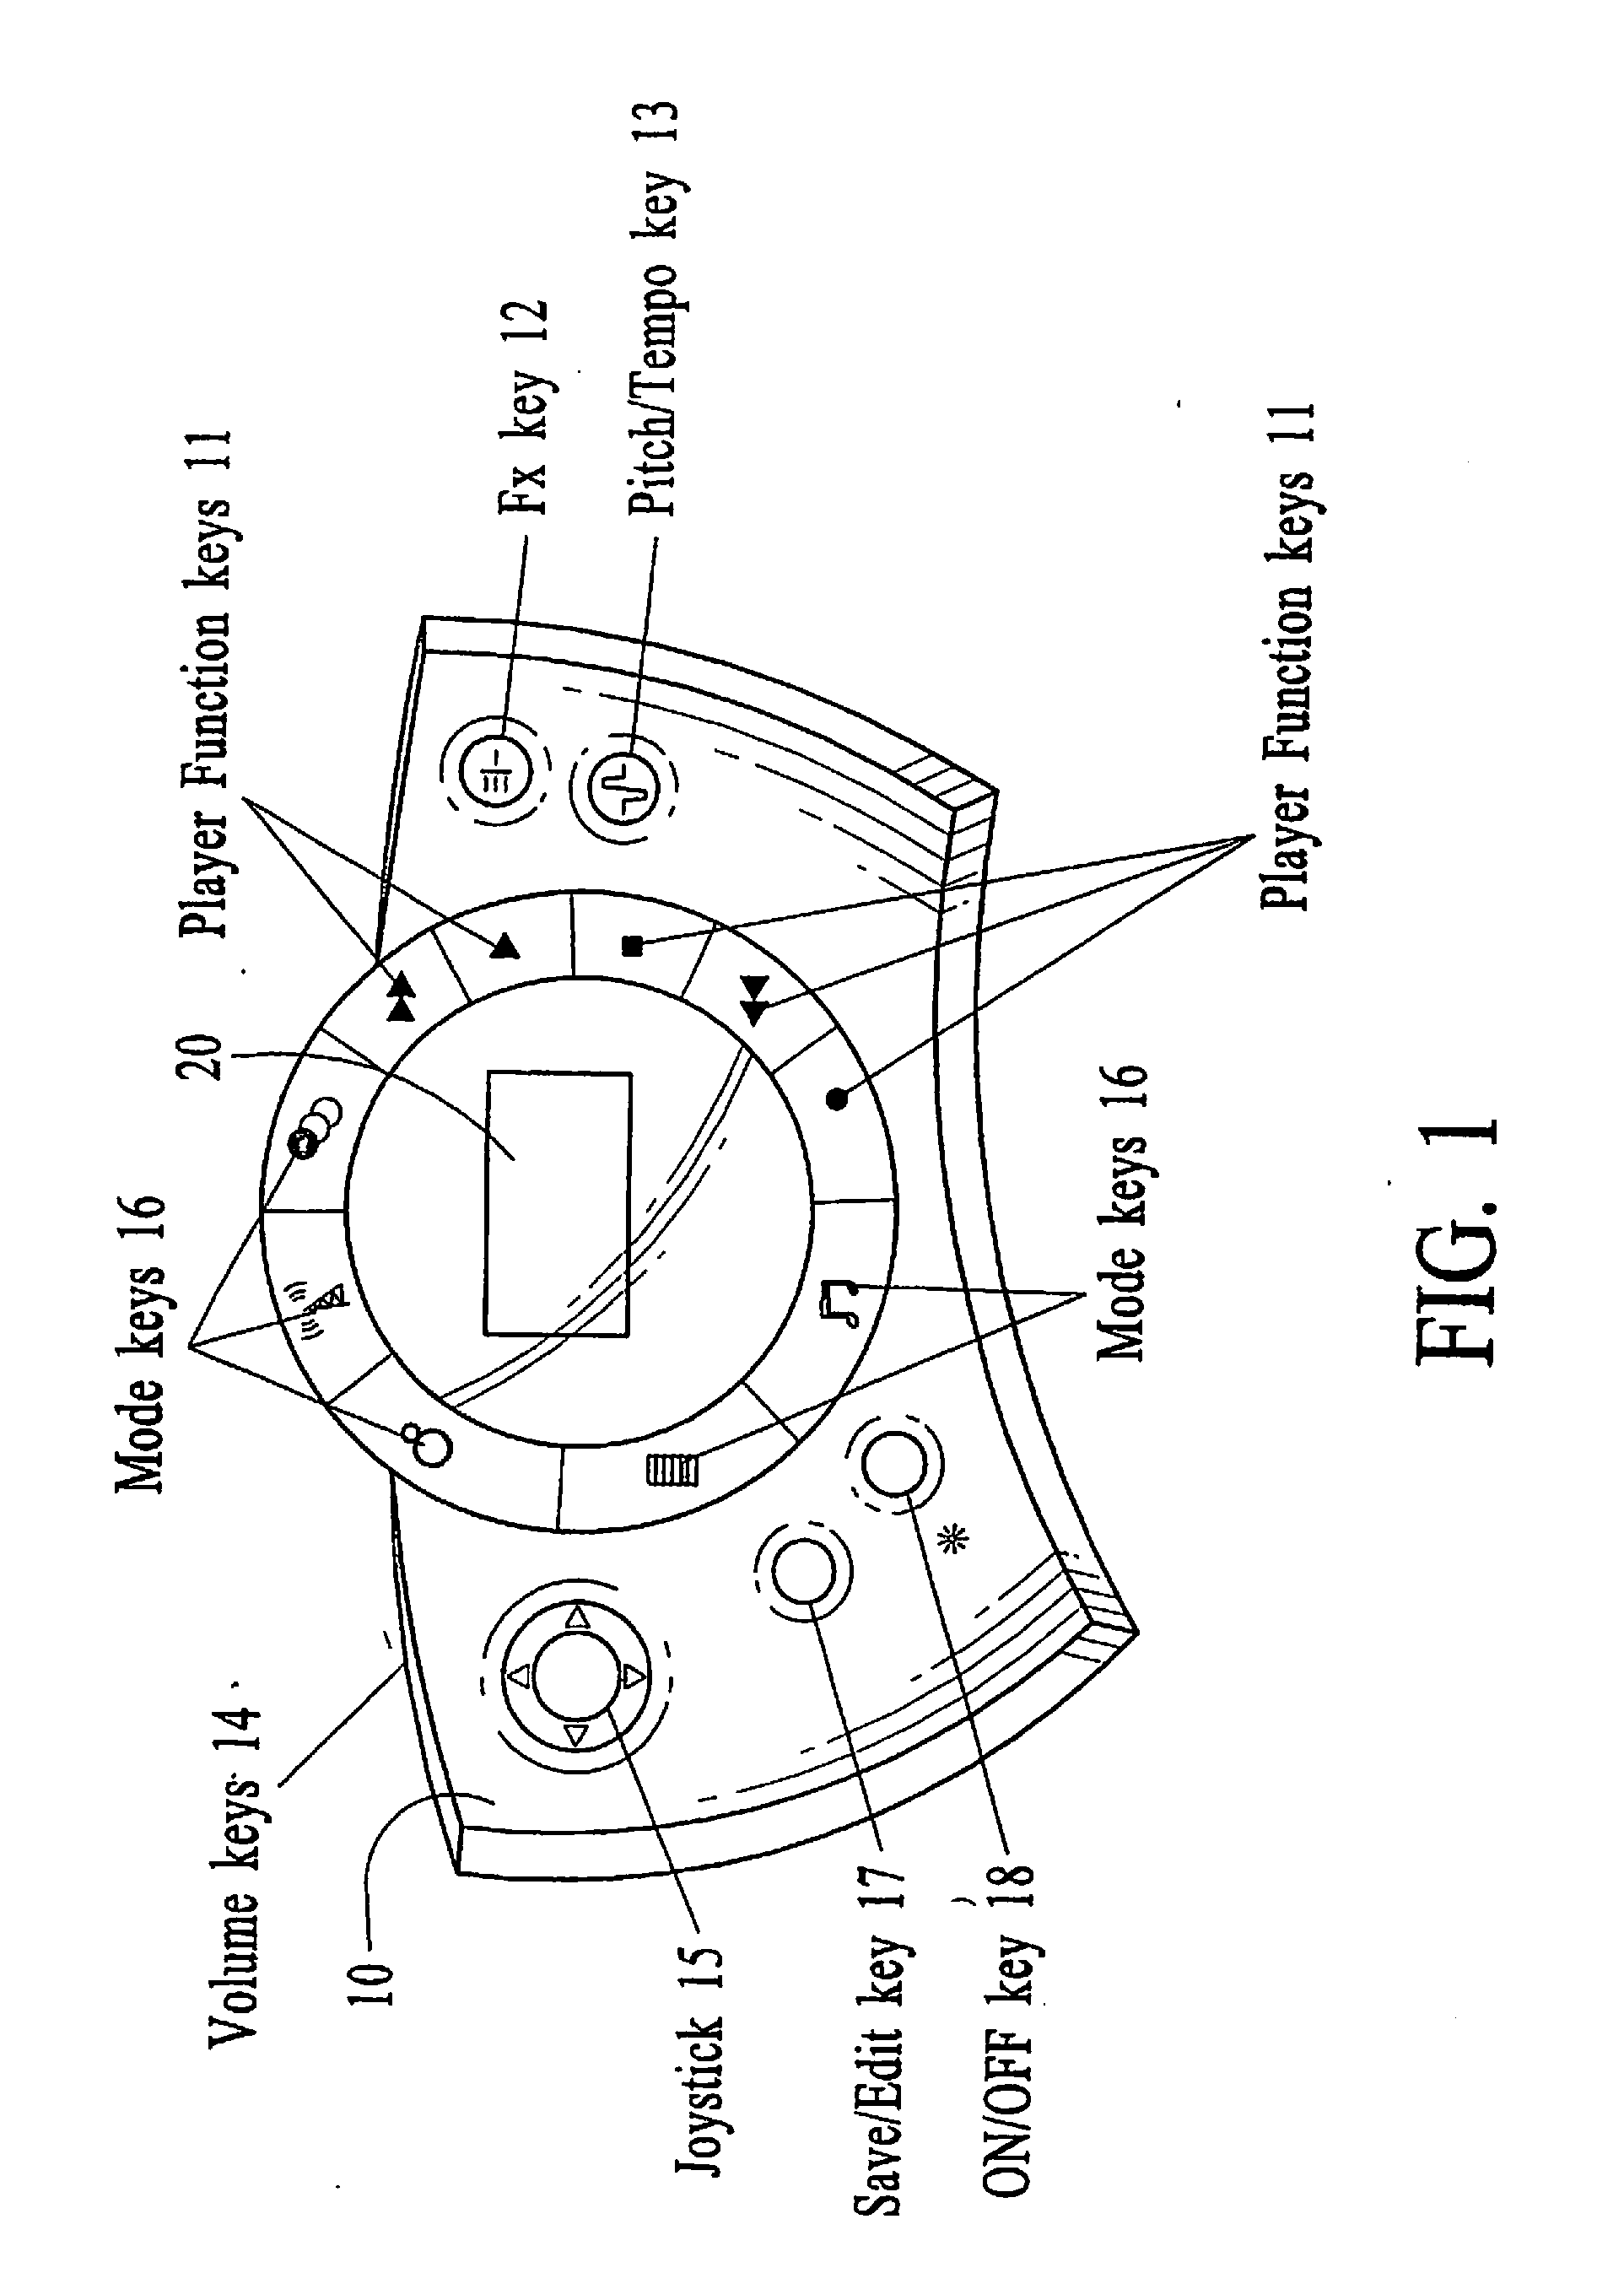 Systems and methods for creating, modifying, interacting with and playing musical compositions